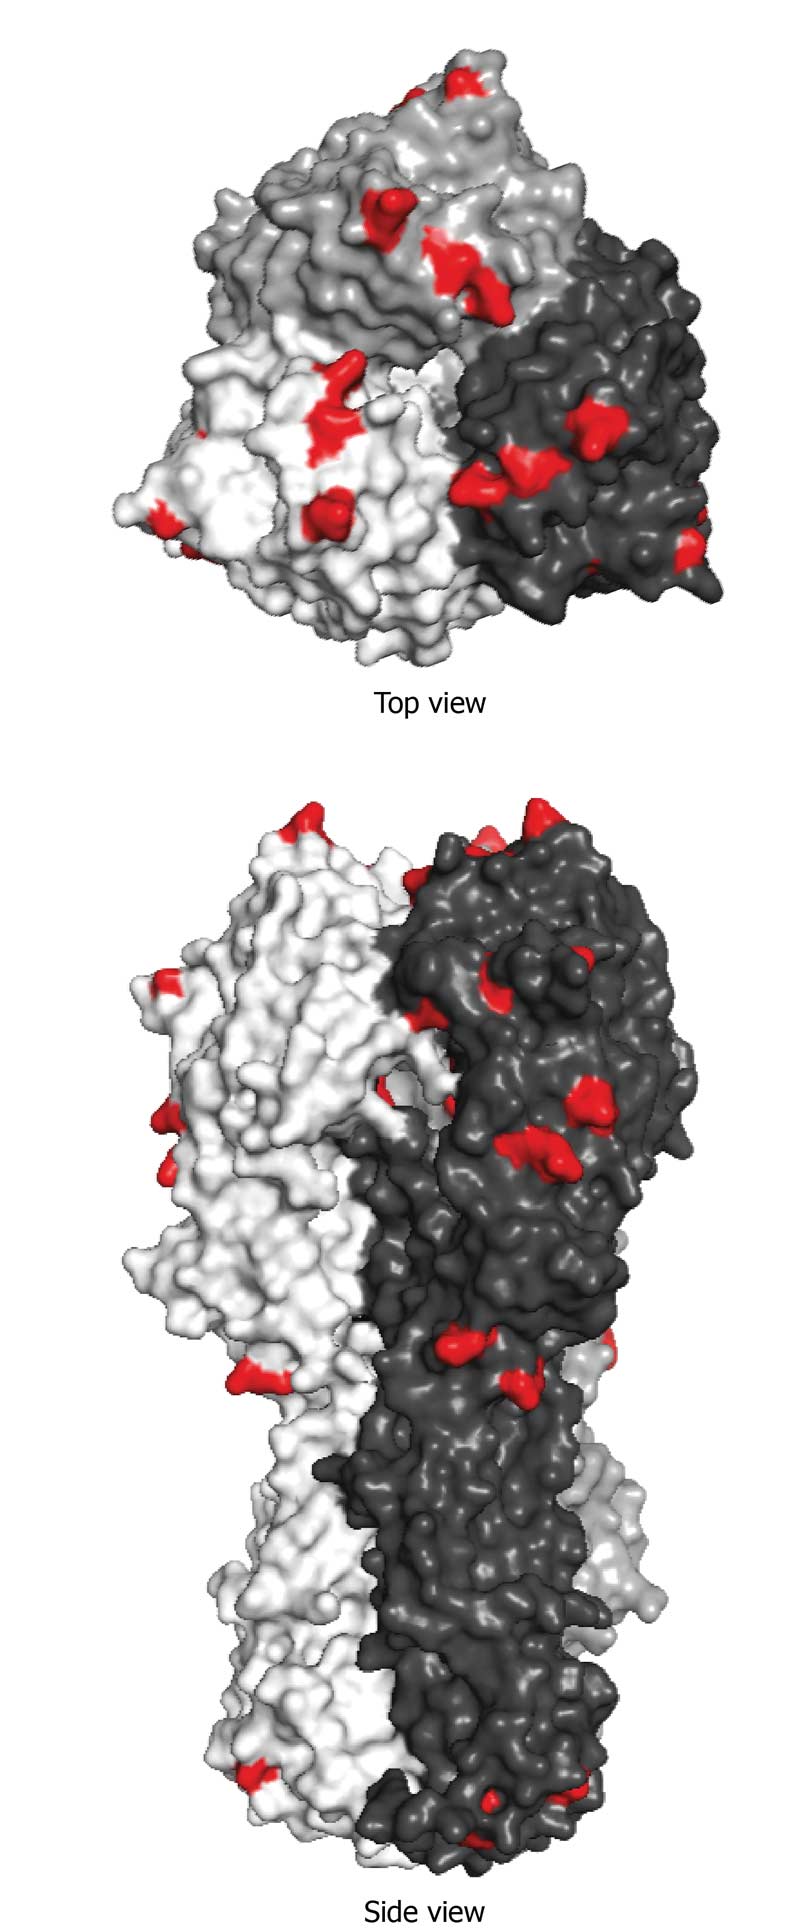 Figure 1. Amino acid changes between Florida clade 1 (FC1) and 2 (FC2) viruses are highlighted in red on this haemagglutinin structure. FC1 viruses predominantly circulate in North America, while FC2 strains have generally been isolated from Europe and Asia. Despite this, FC1 viruses have been isolated from horses in the UK before, which emphasises the importance of both clades being included in vaccines.